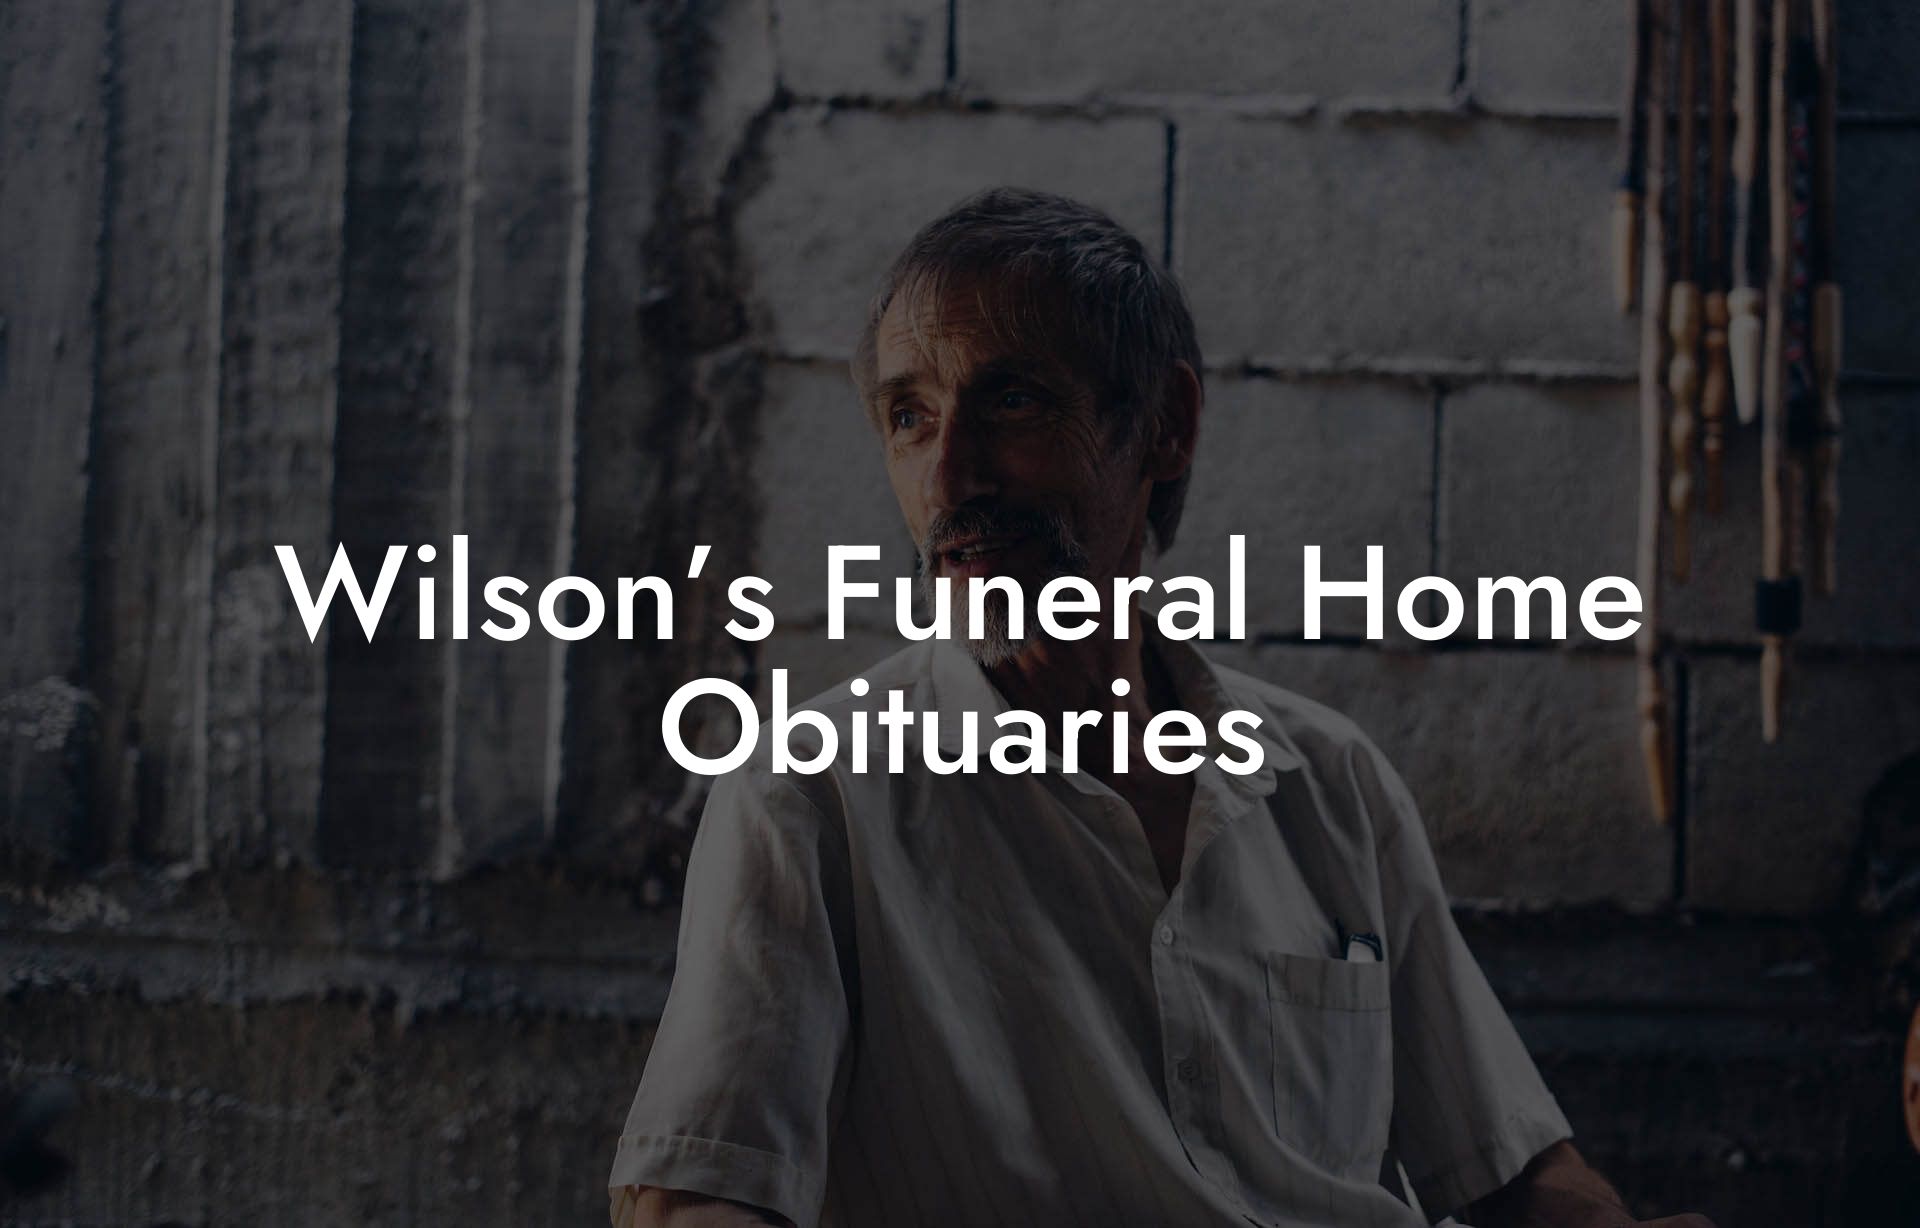 Wilson's Funeral Home Obituaries